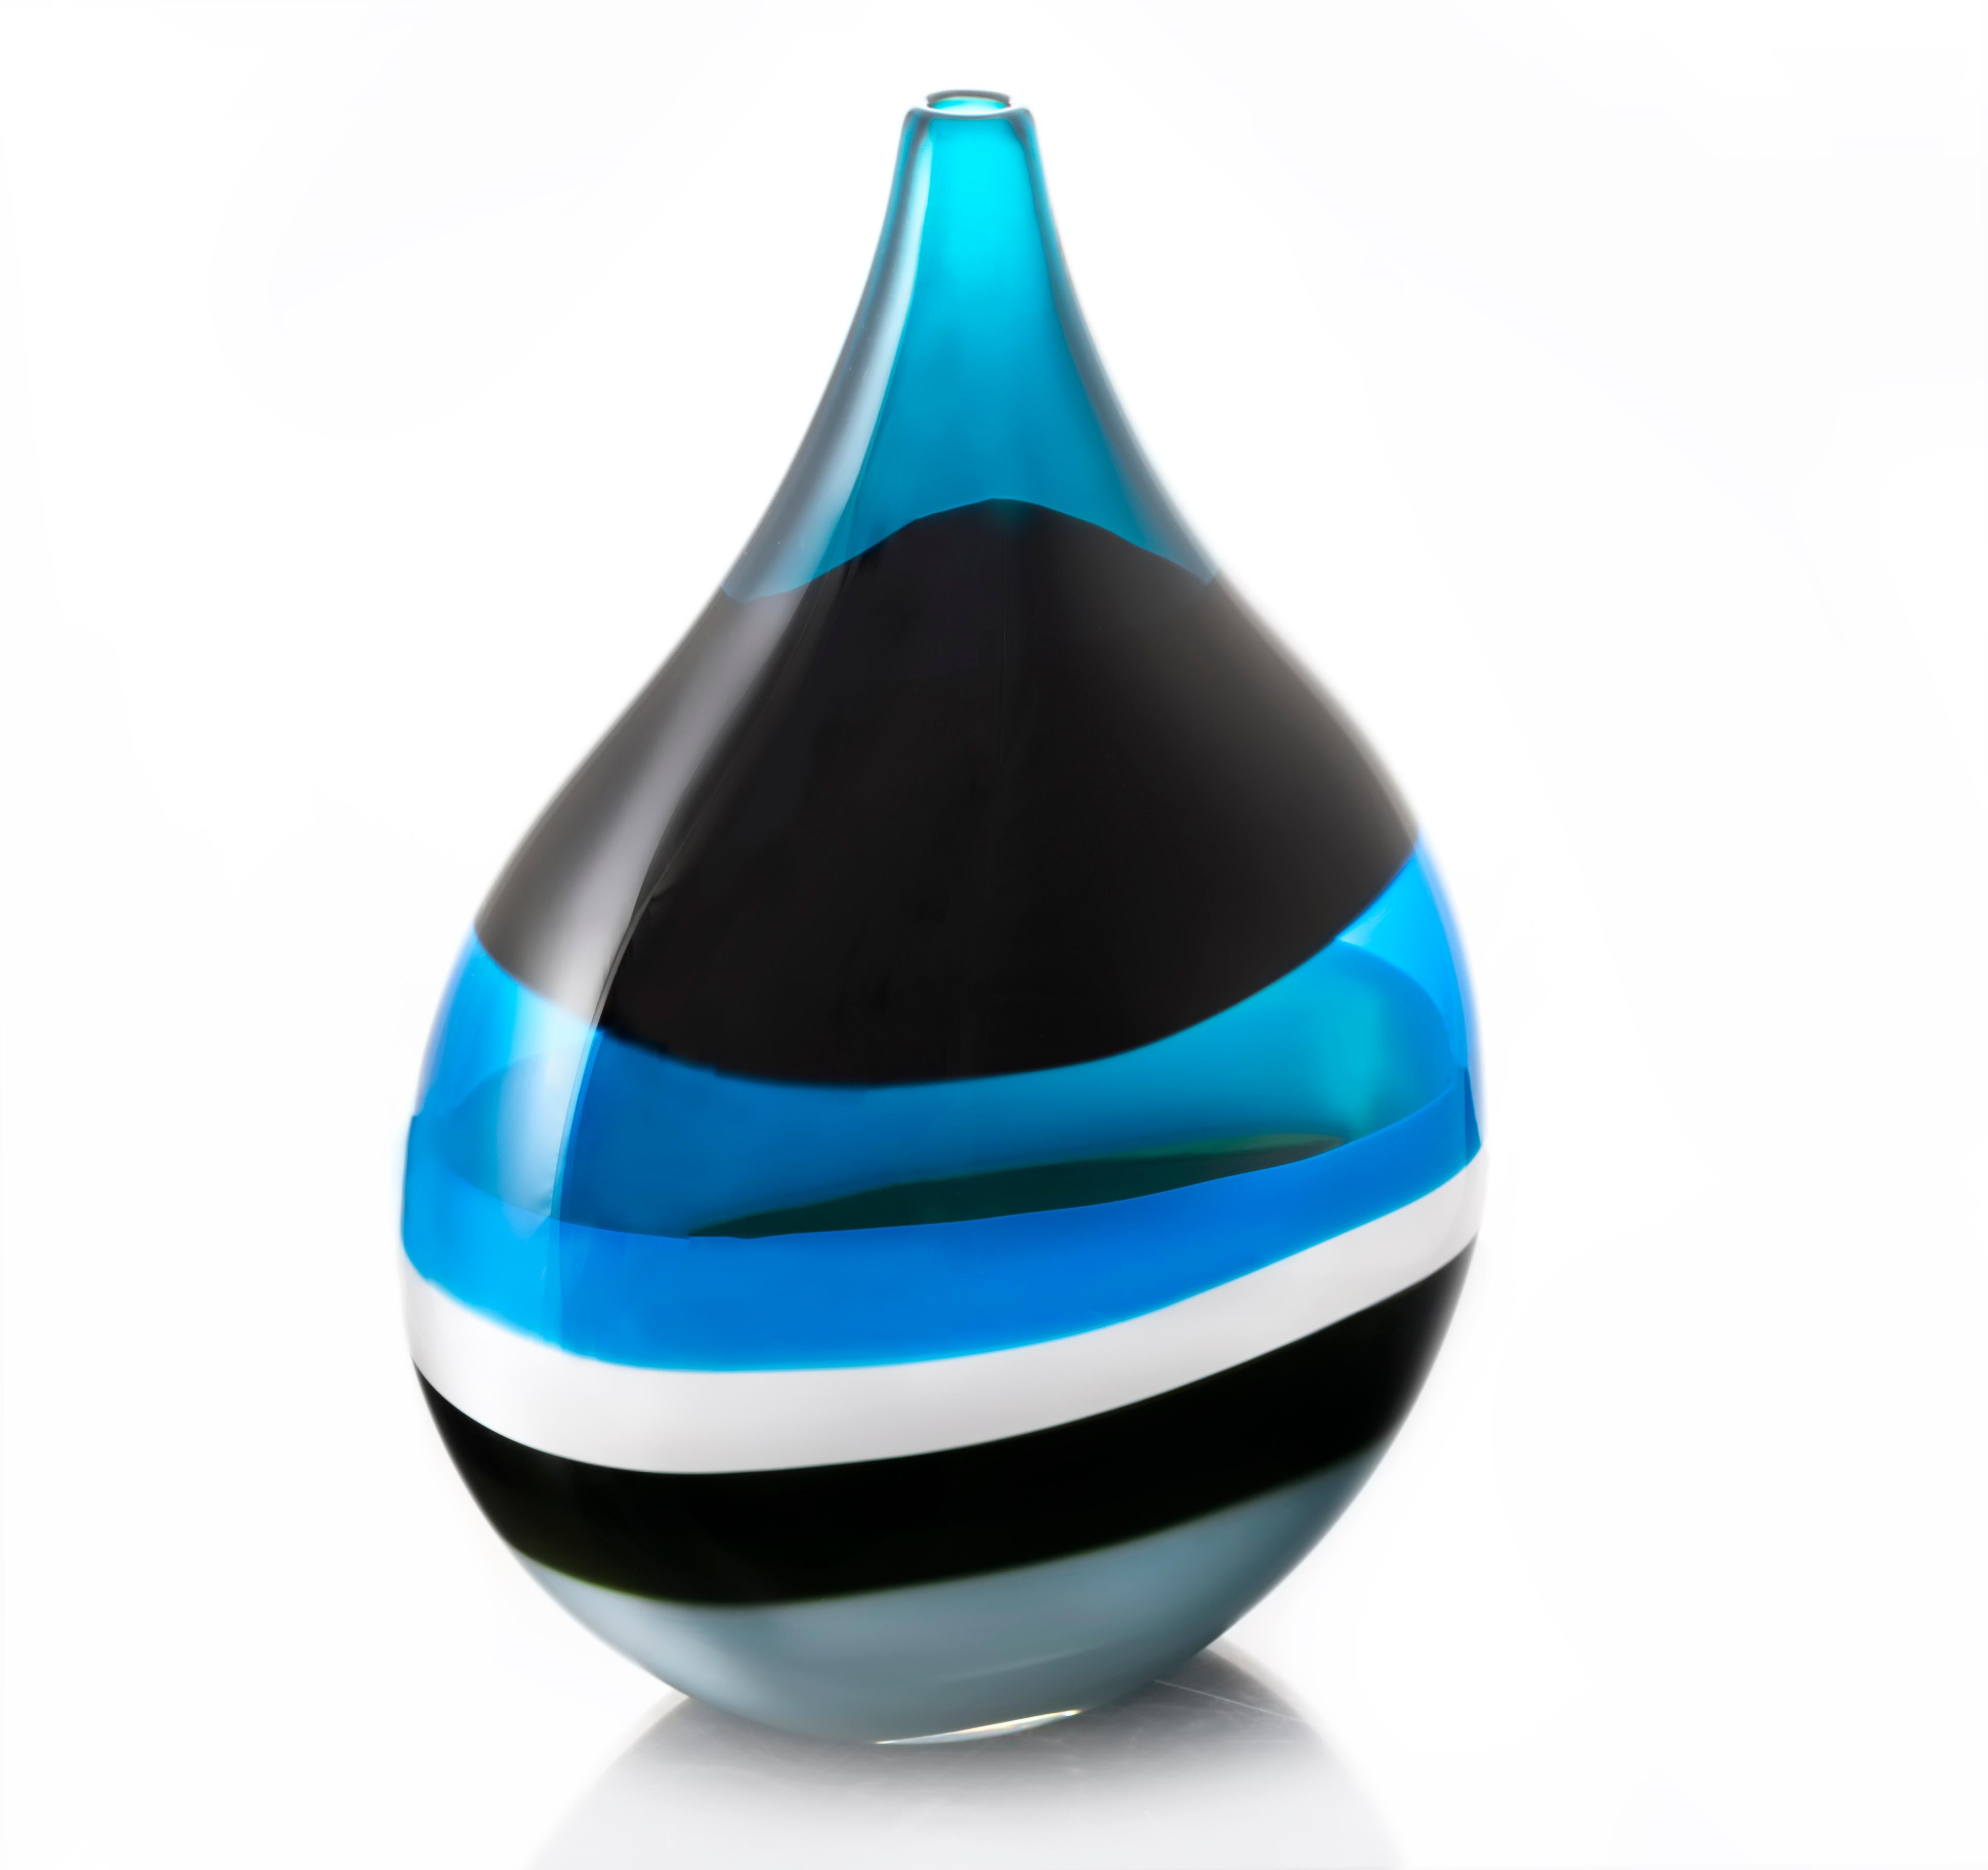 Modern blown glass vase, 6 banded blue flat teardrop by Siemon & Salazar

Inspired by the rich hues and topography of Southern California, alternating layers of opaque and transparent colors are applied to clear glass. New colors are formed by